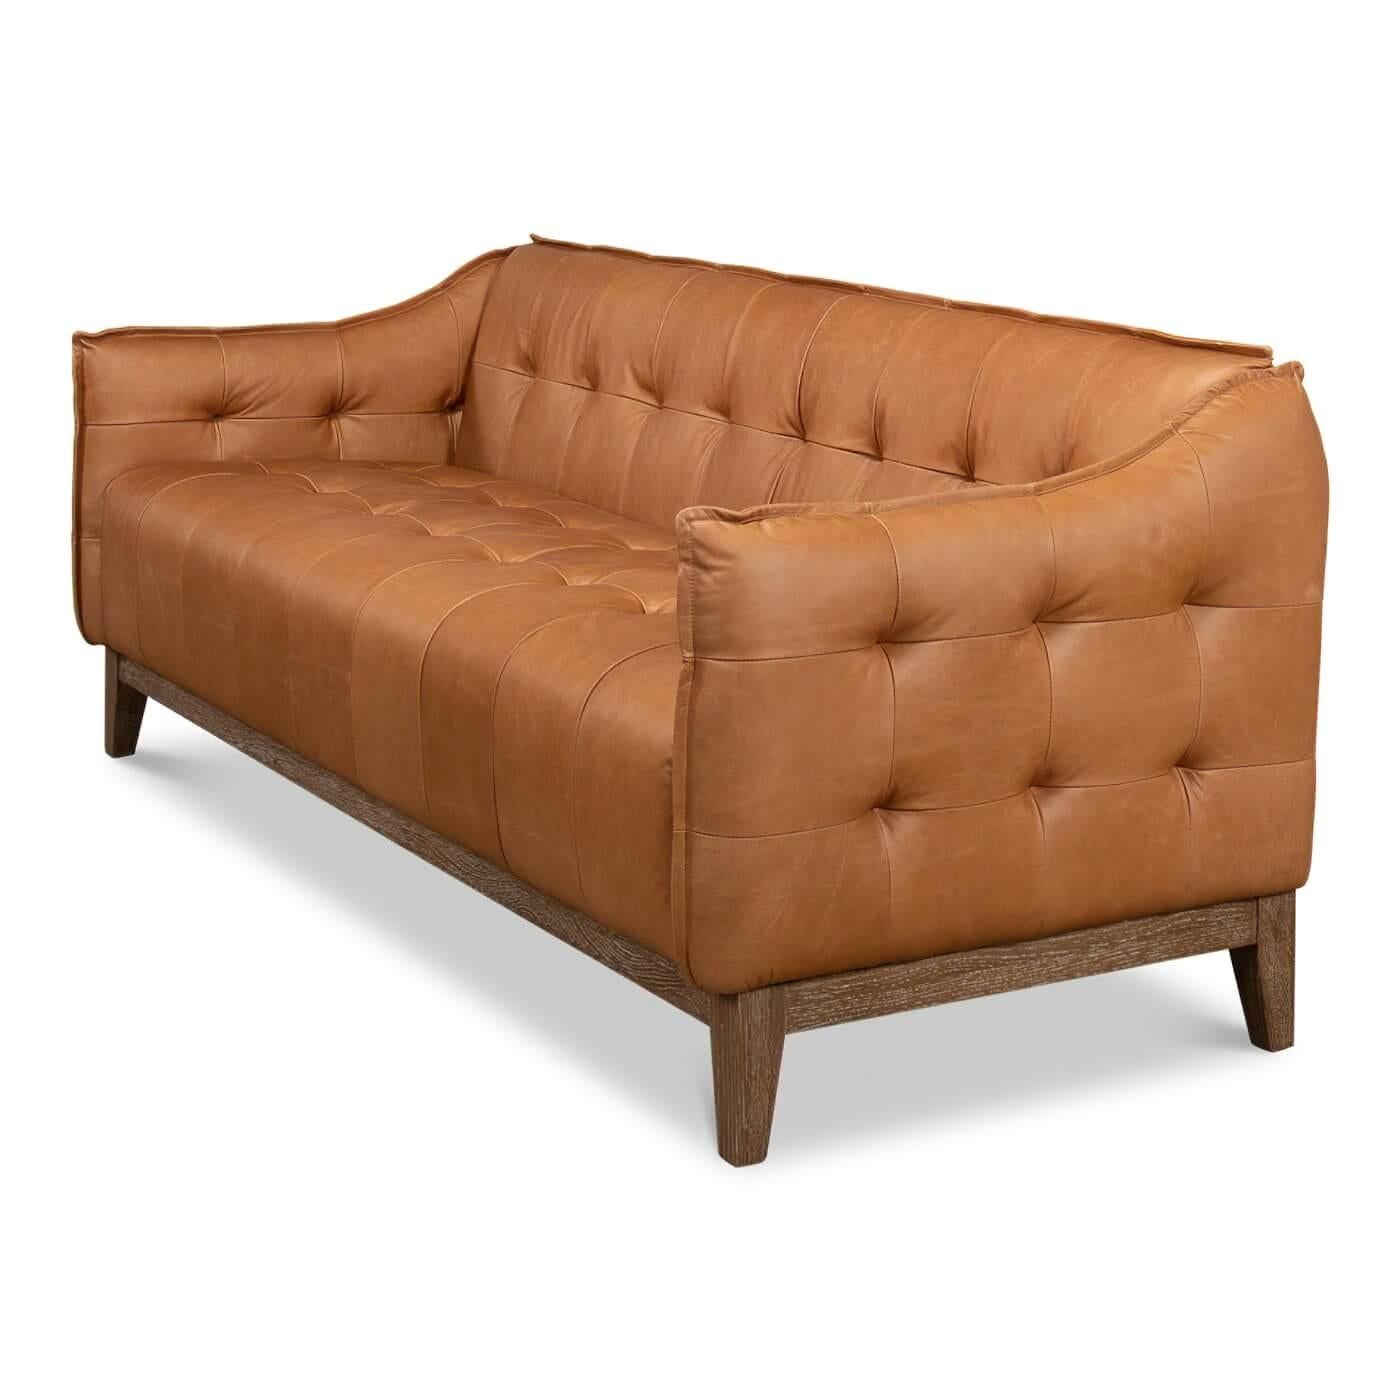 A mid-century style leather sofa with a distressed oak base. This contemporary sofa is upholstered in traditional brown leather with a button-tufted interior and sides. 

Dimensions: 77